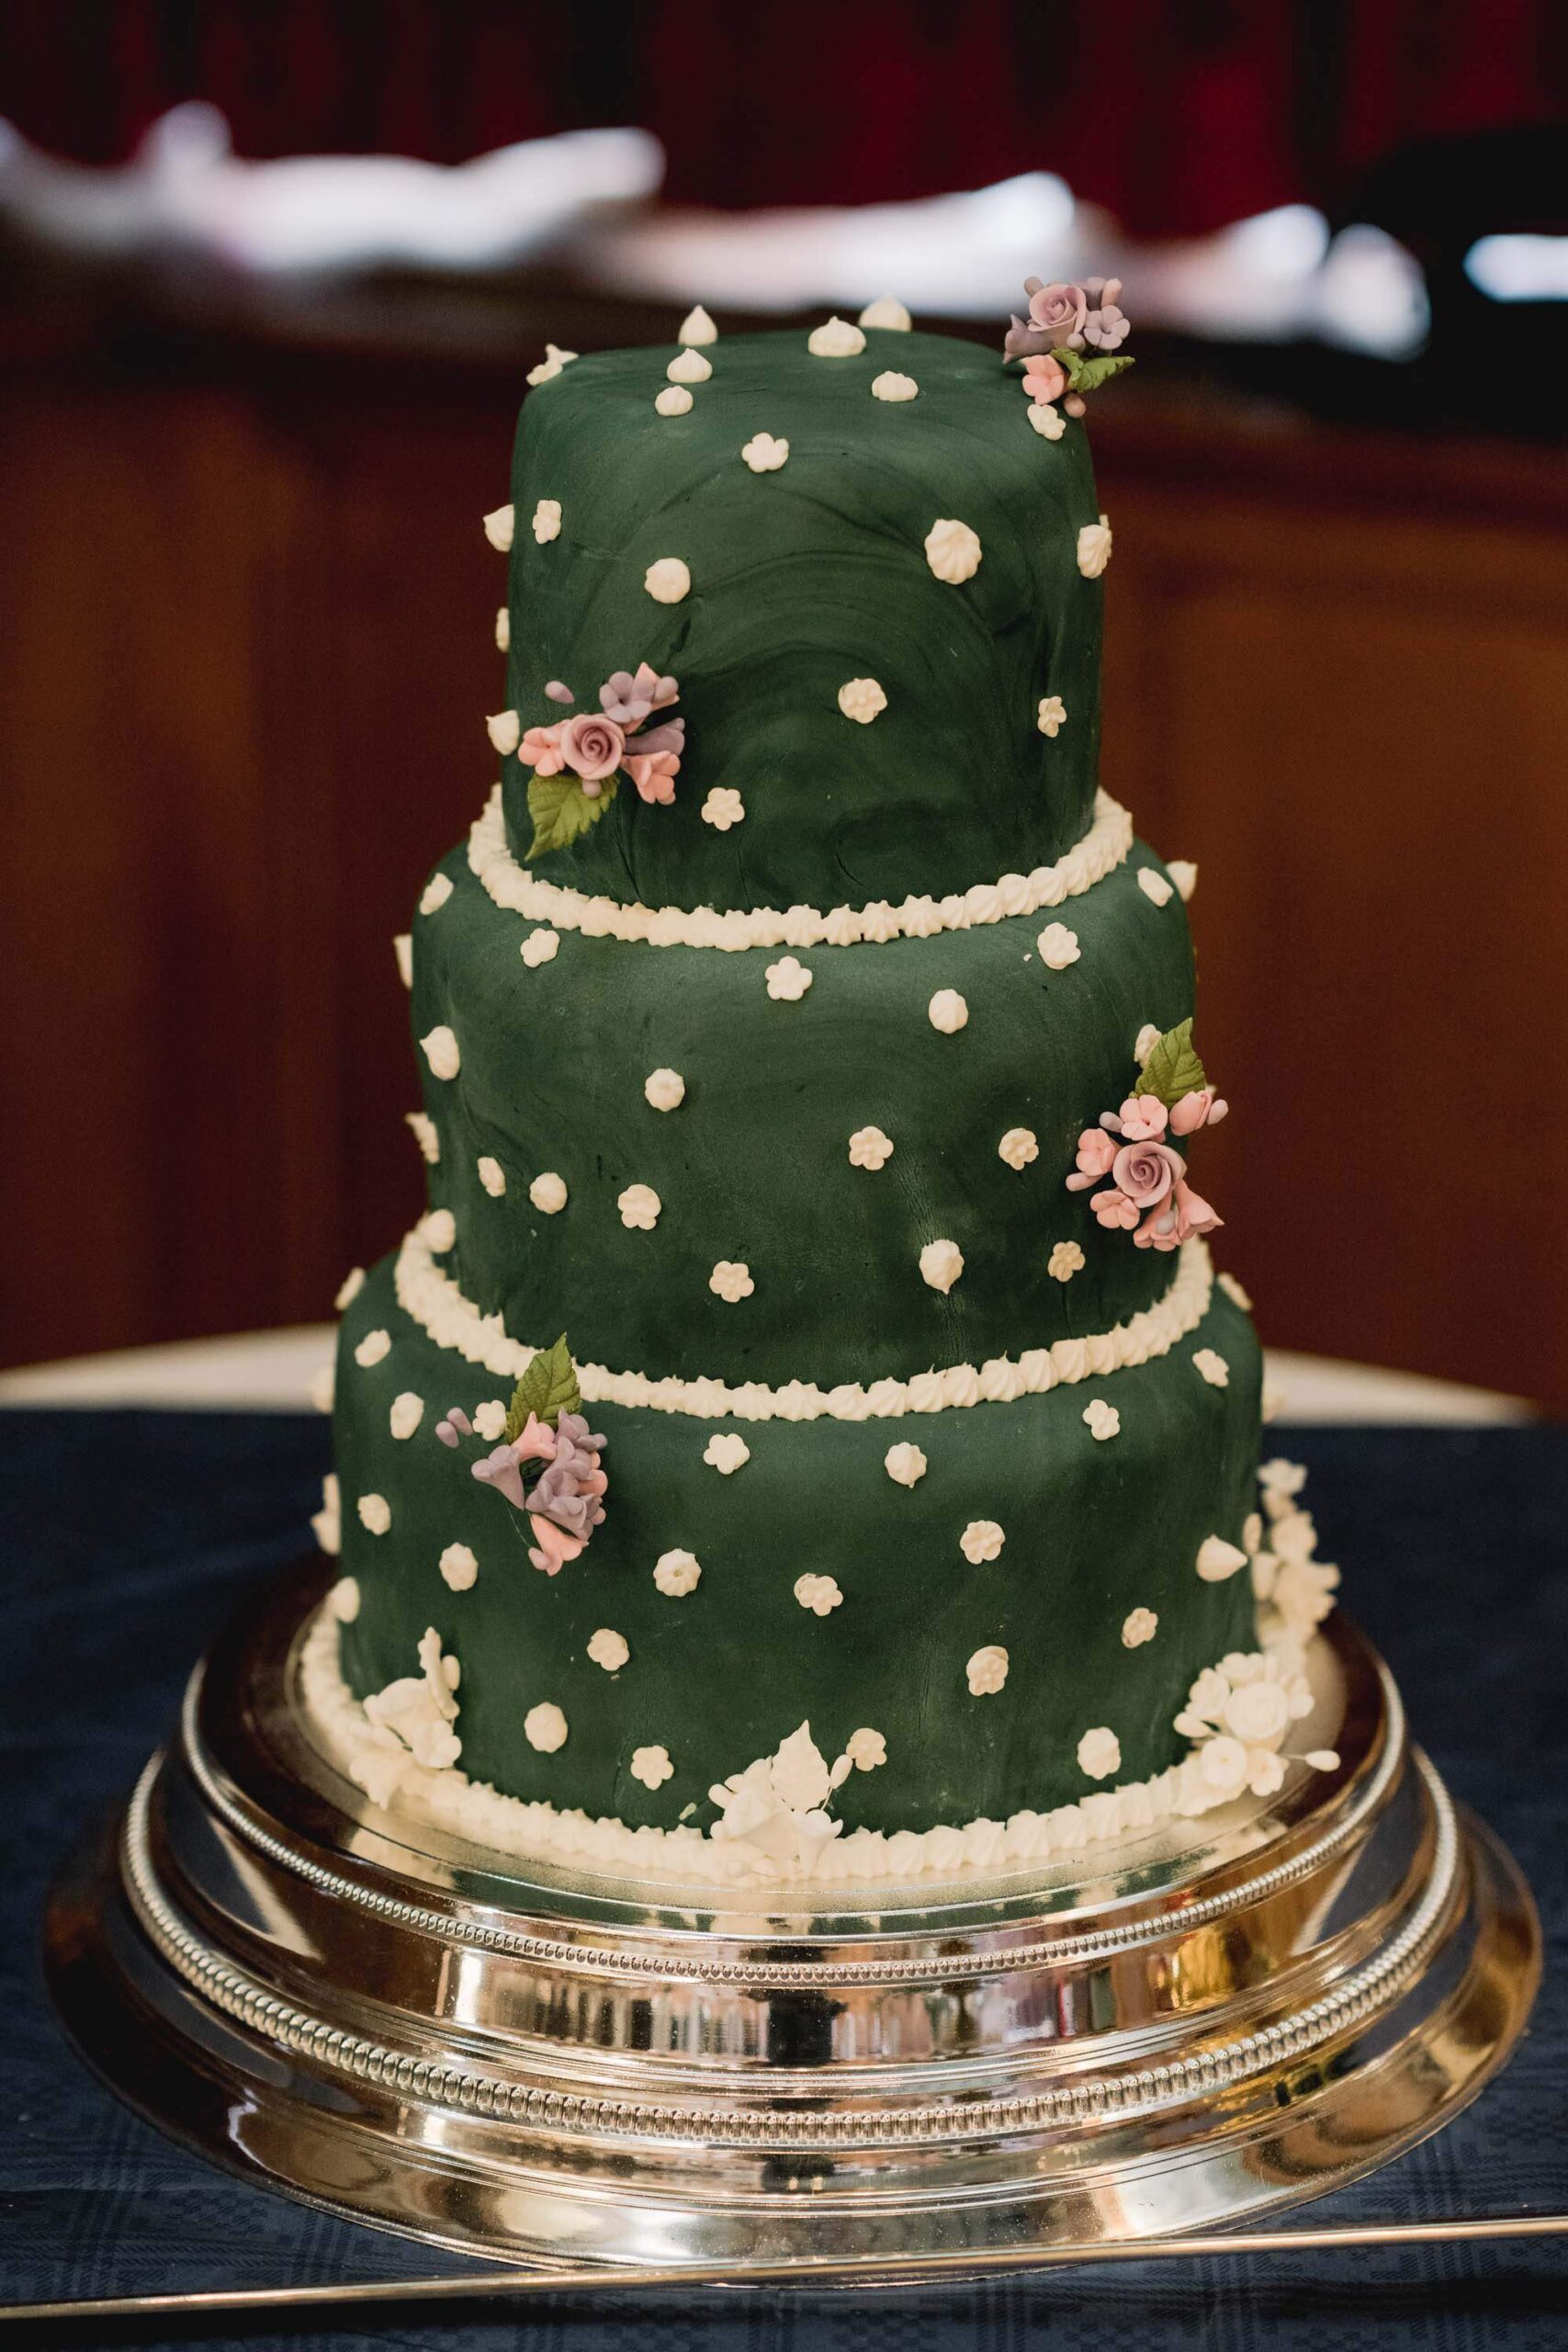 Green wedding cake with pink flowers.